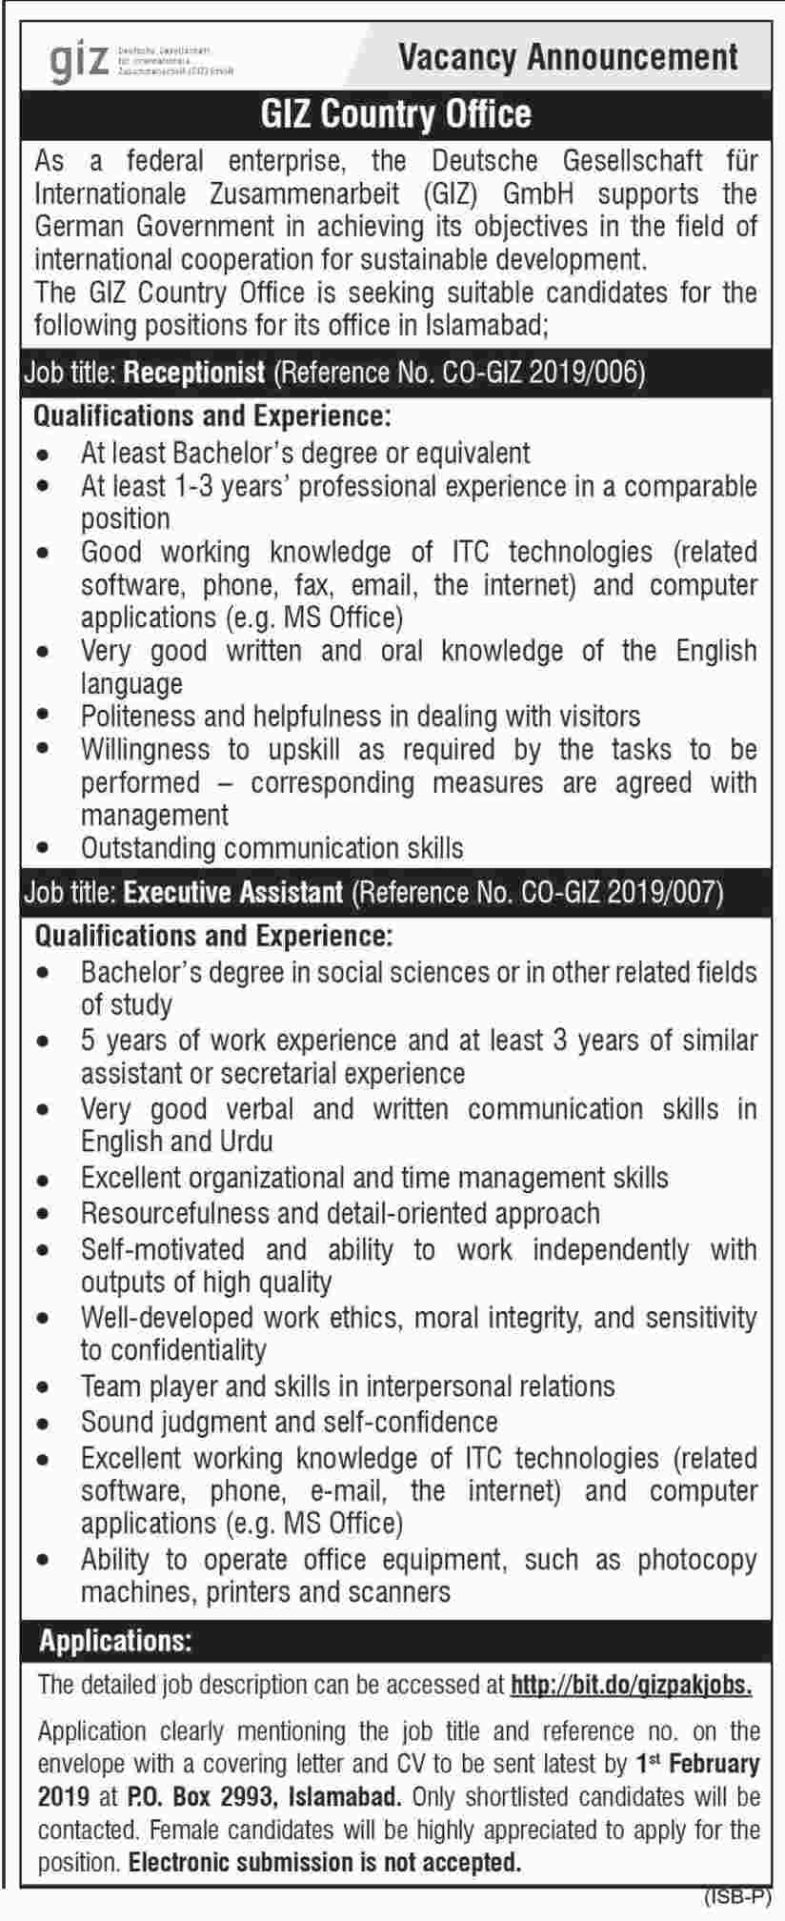 GIZ Pakistan Jobs 2019 for Executive Assistant and Receptionist